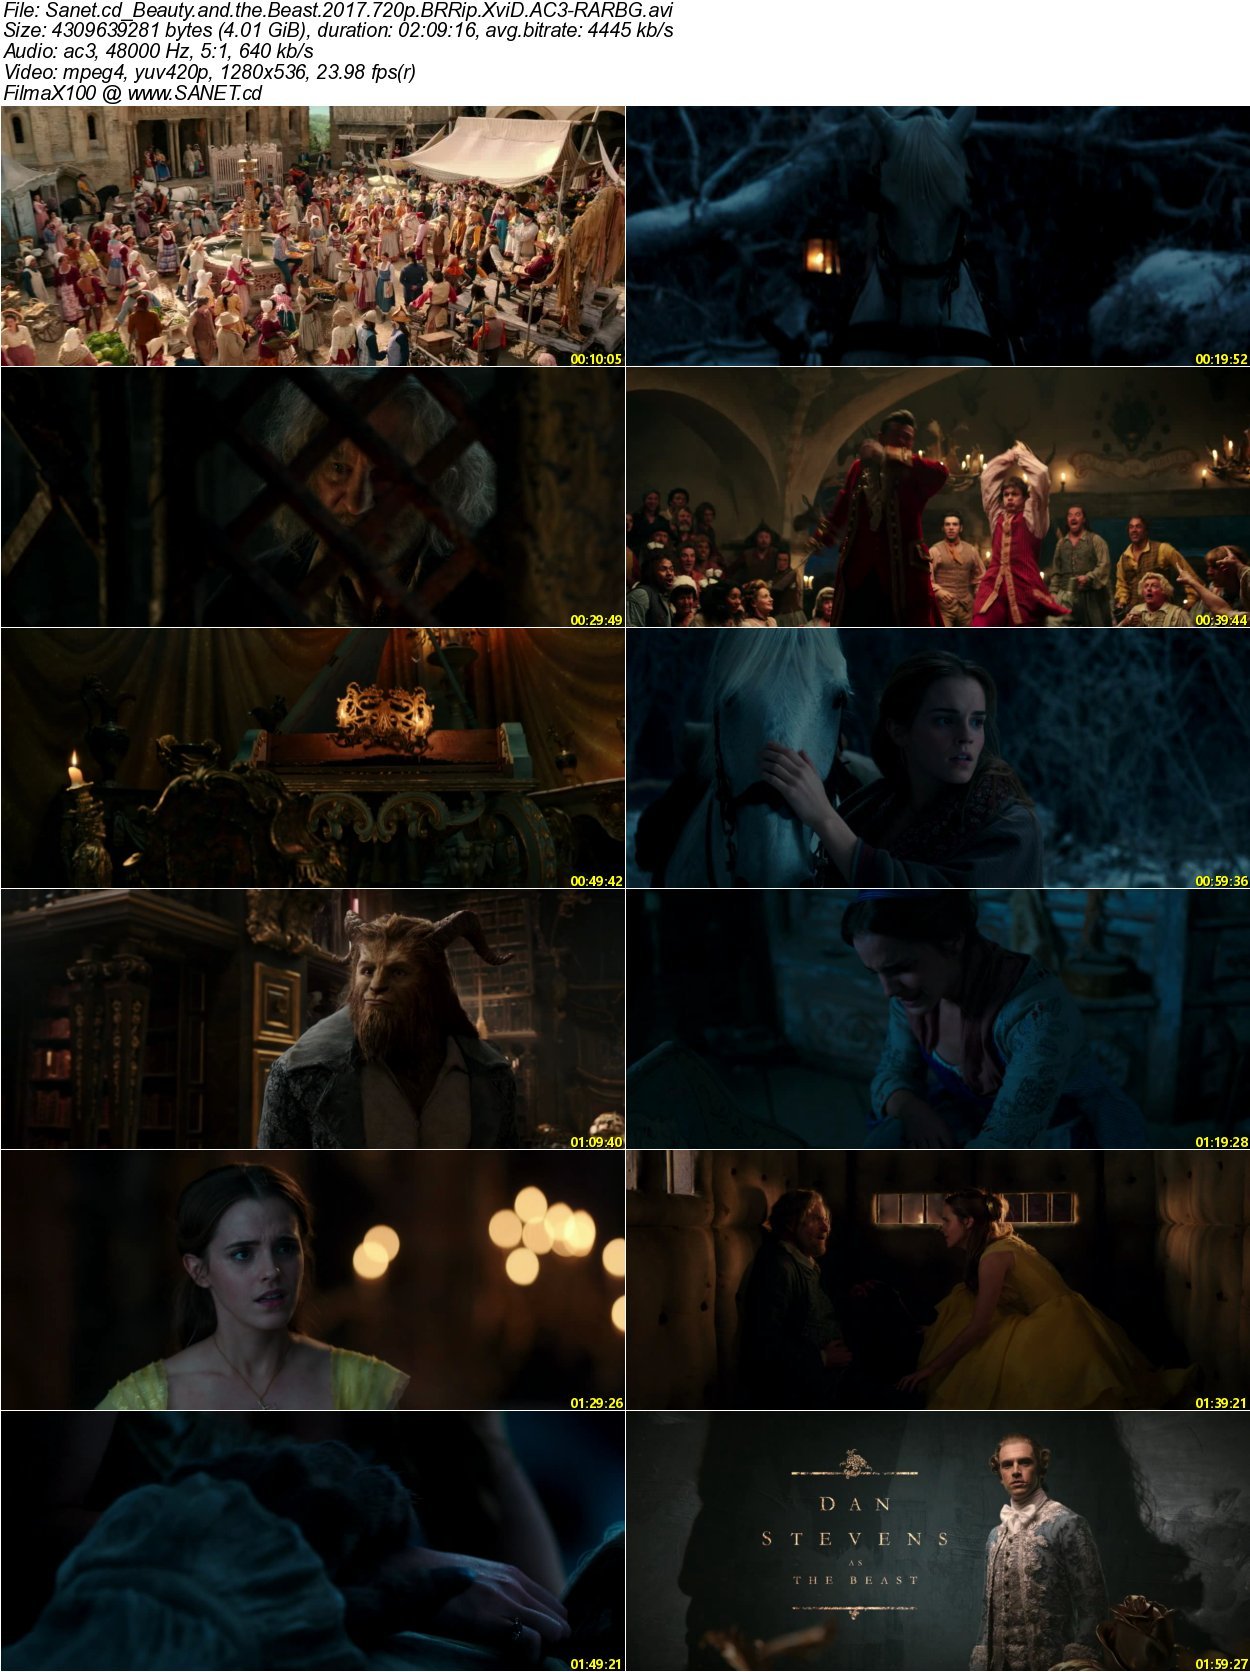 Beauty and the Beast 2017 360p / 480p / 720p / 1080p